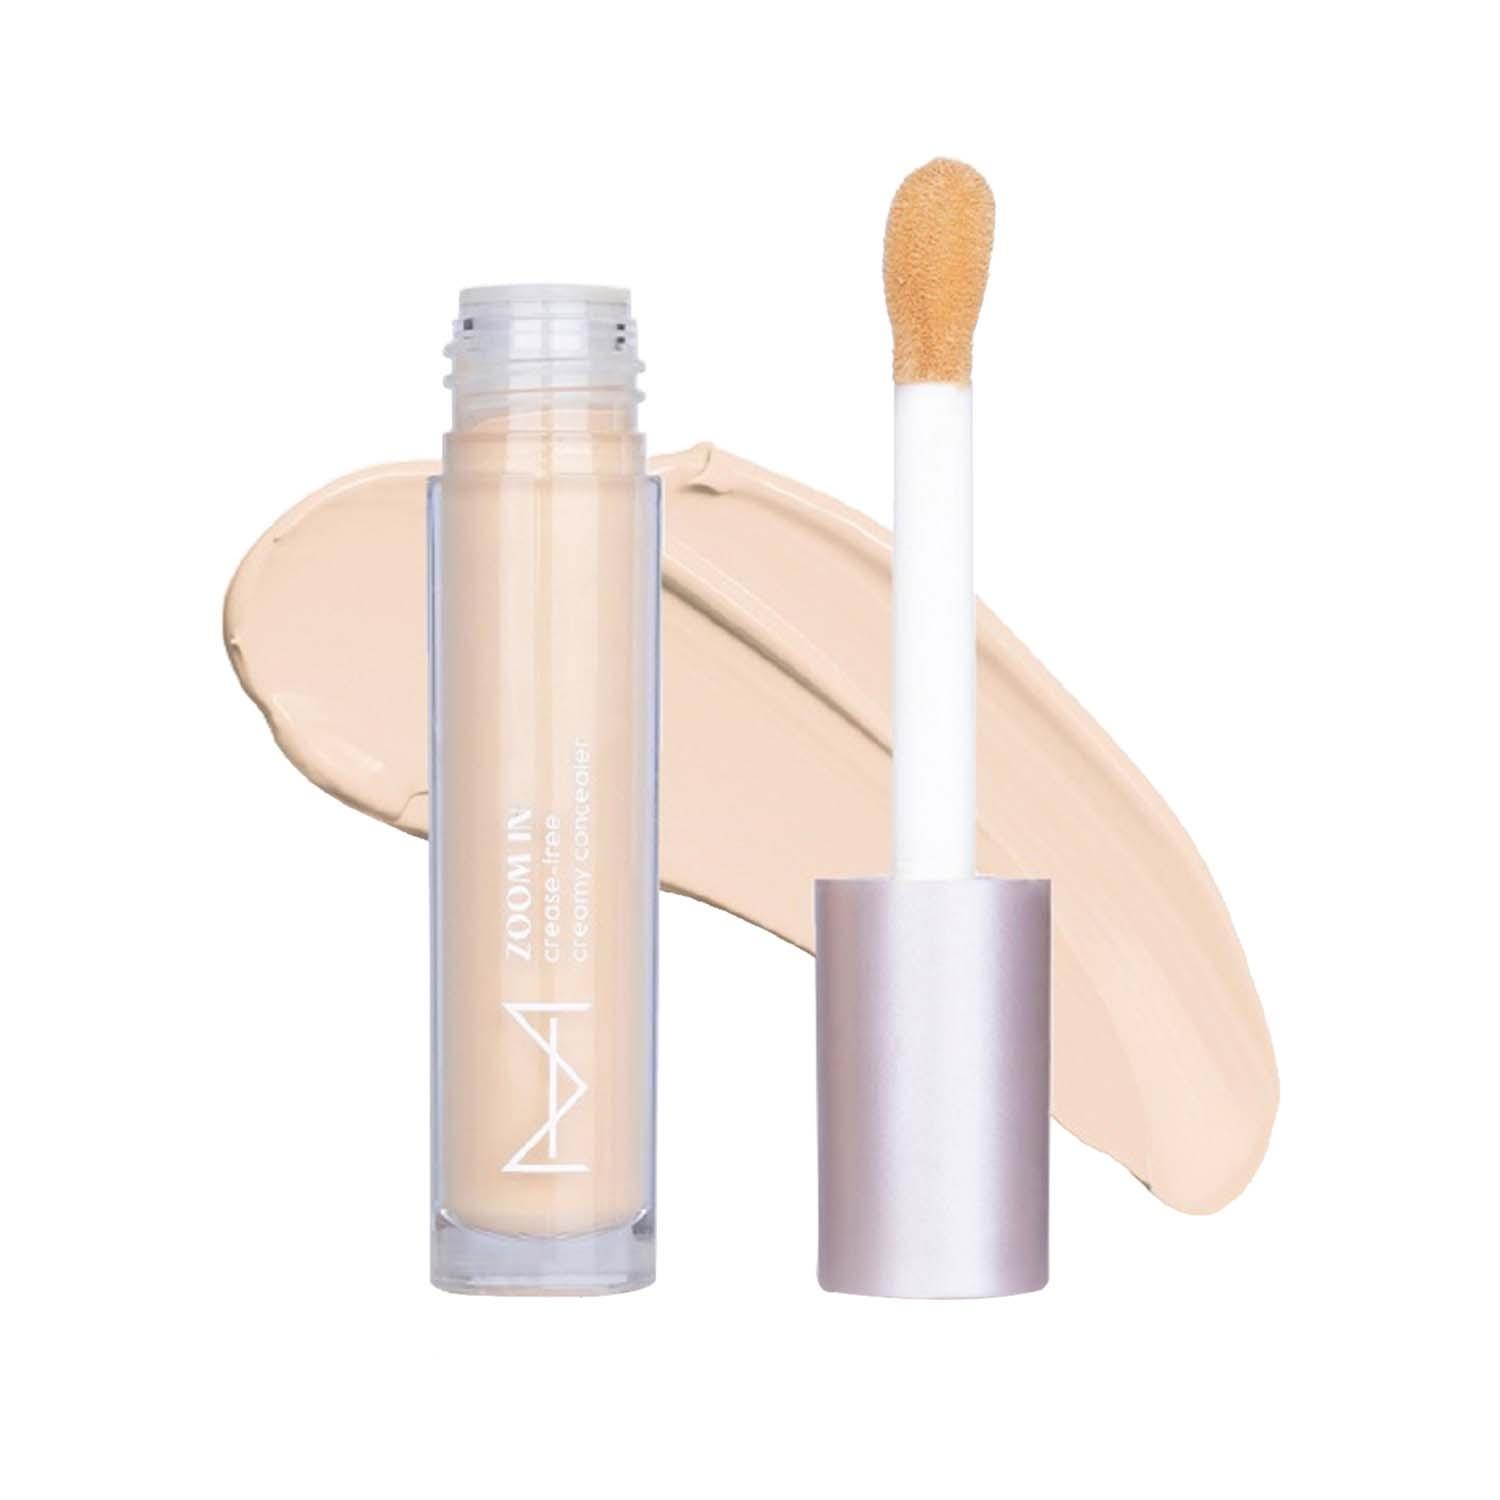 HOUSE OF MAKEUP | HOUSE OF MAKEUP Zoom In Crease-Free, Creamy Concealer - L01 Light Skin Tone (6 ml)